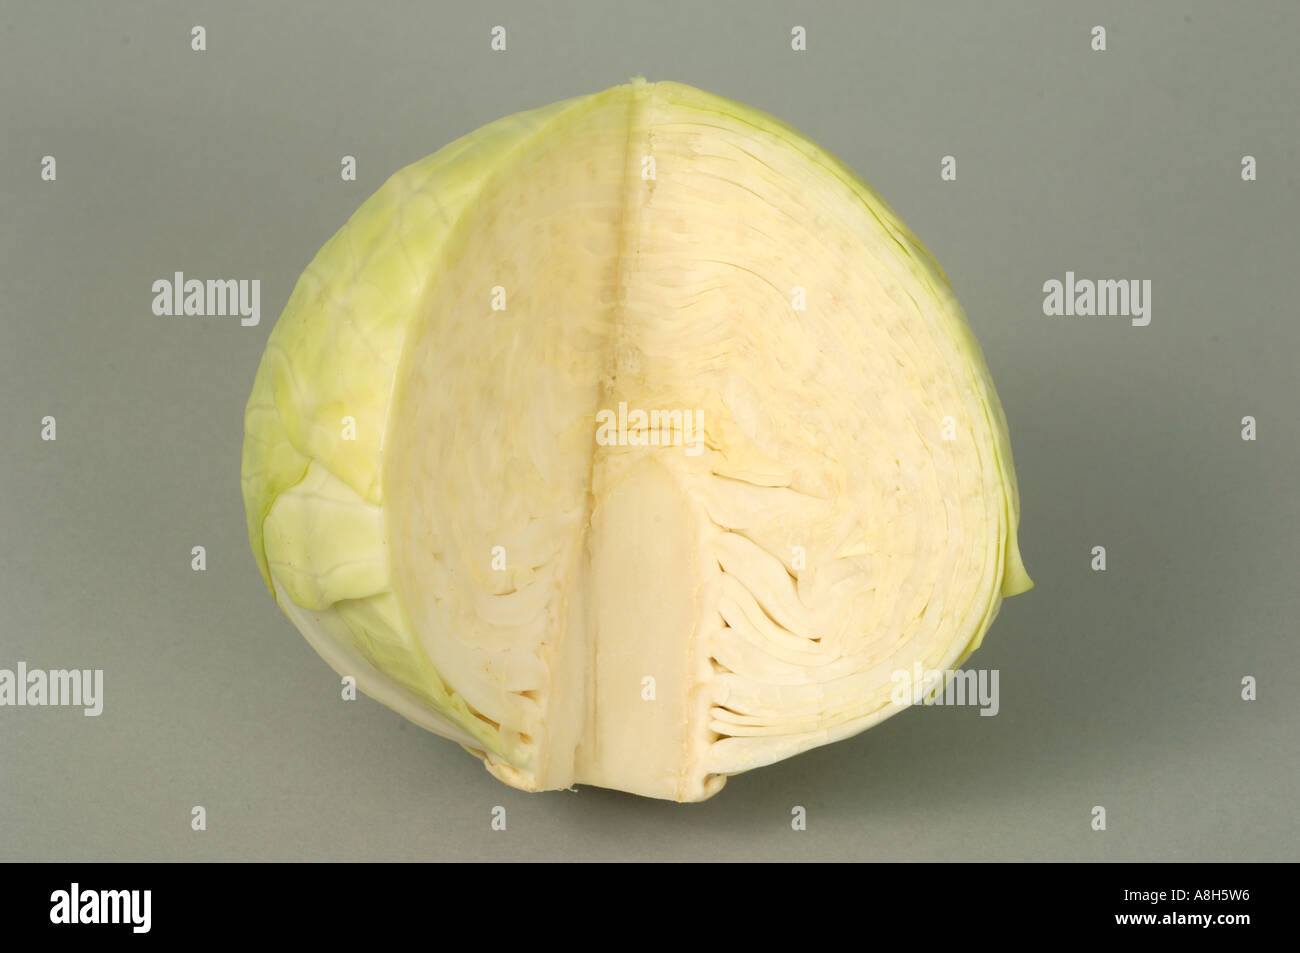 Vegetable produce typical supermarket bought round cabbage head with section cut out Stock Photo